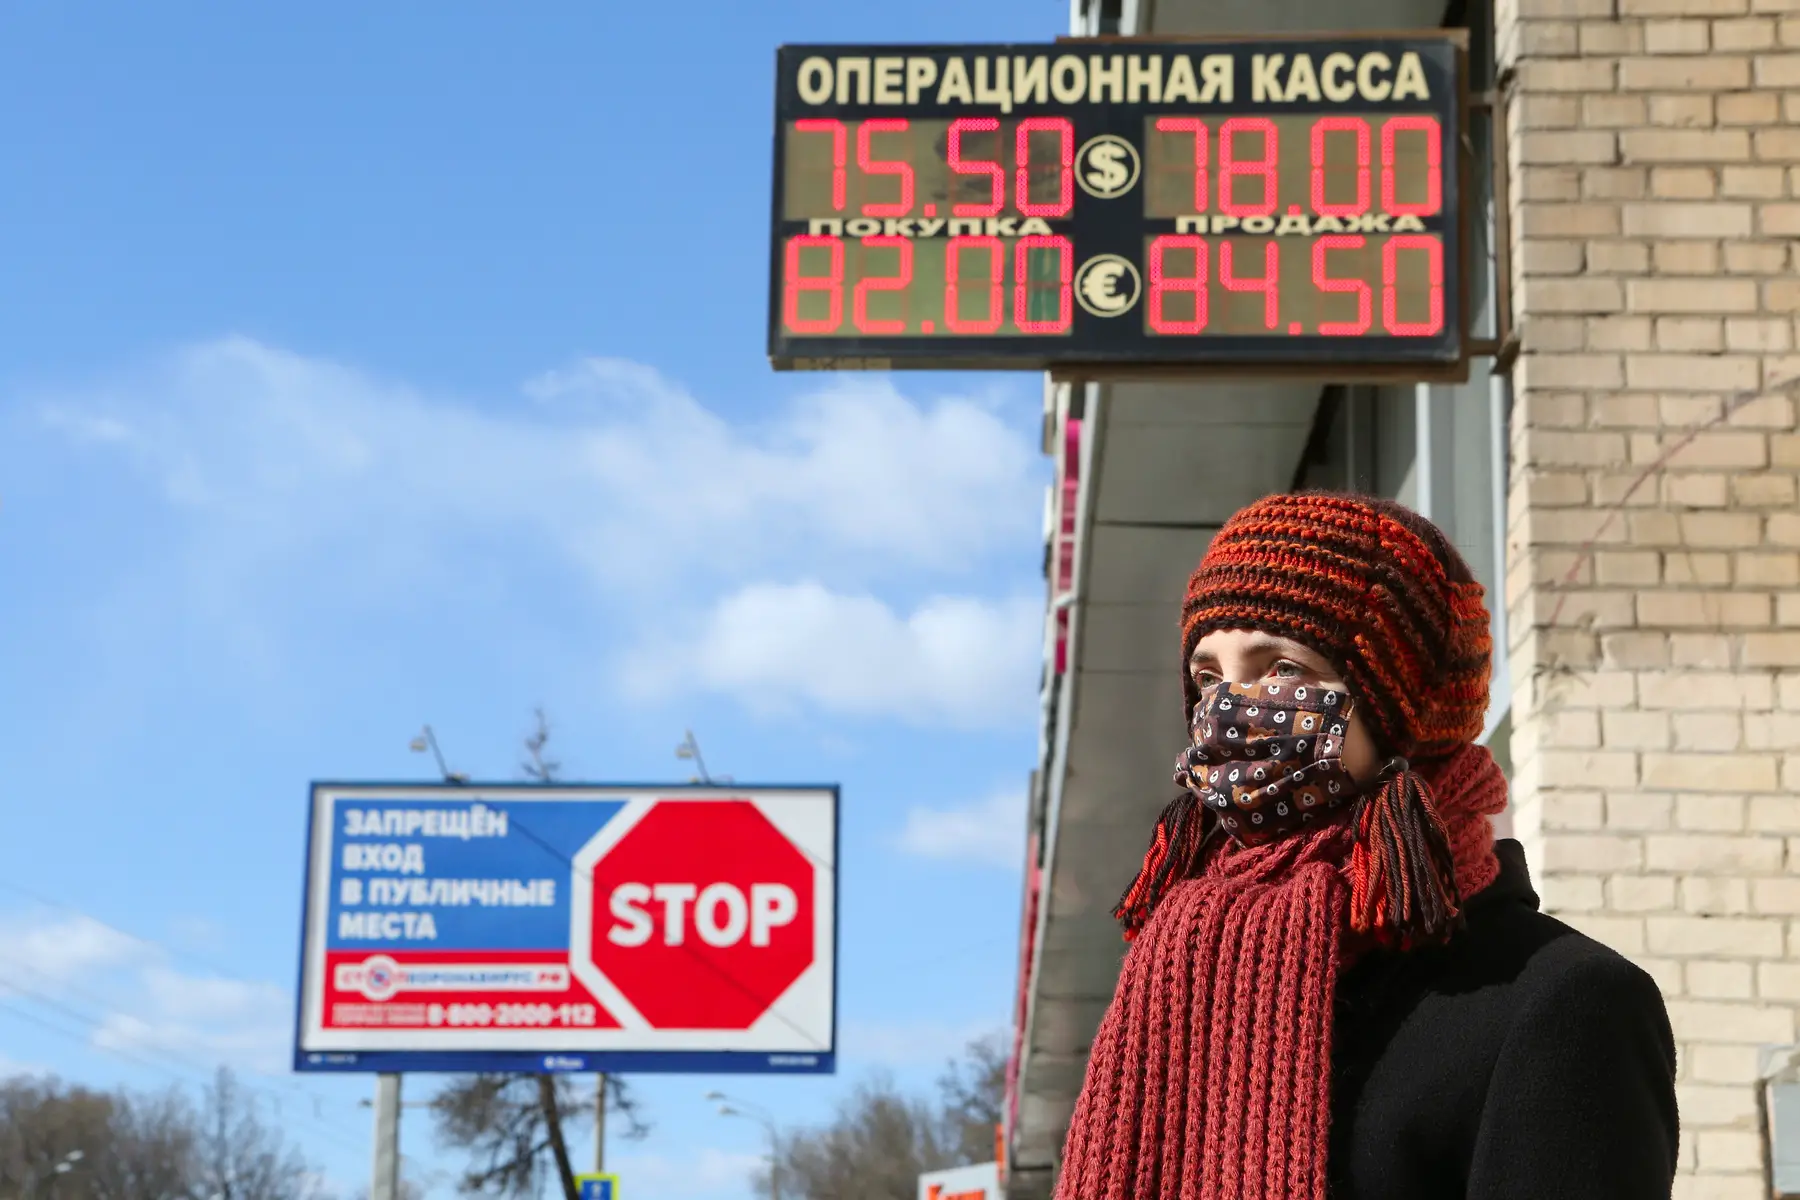 Masked woman stands near electronic exchange rate board during COVID-19 in Russia